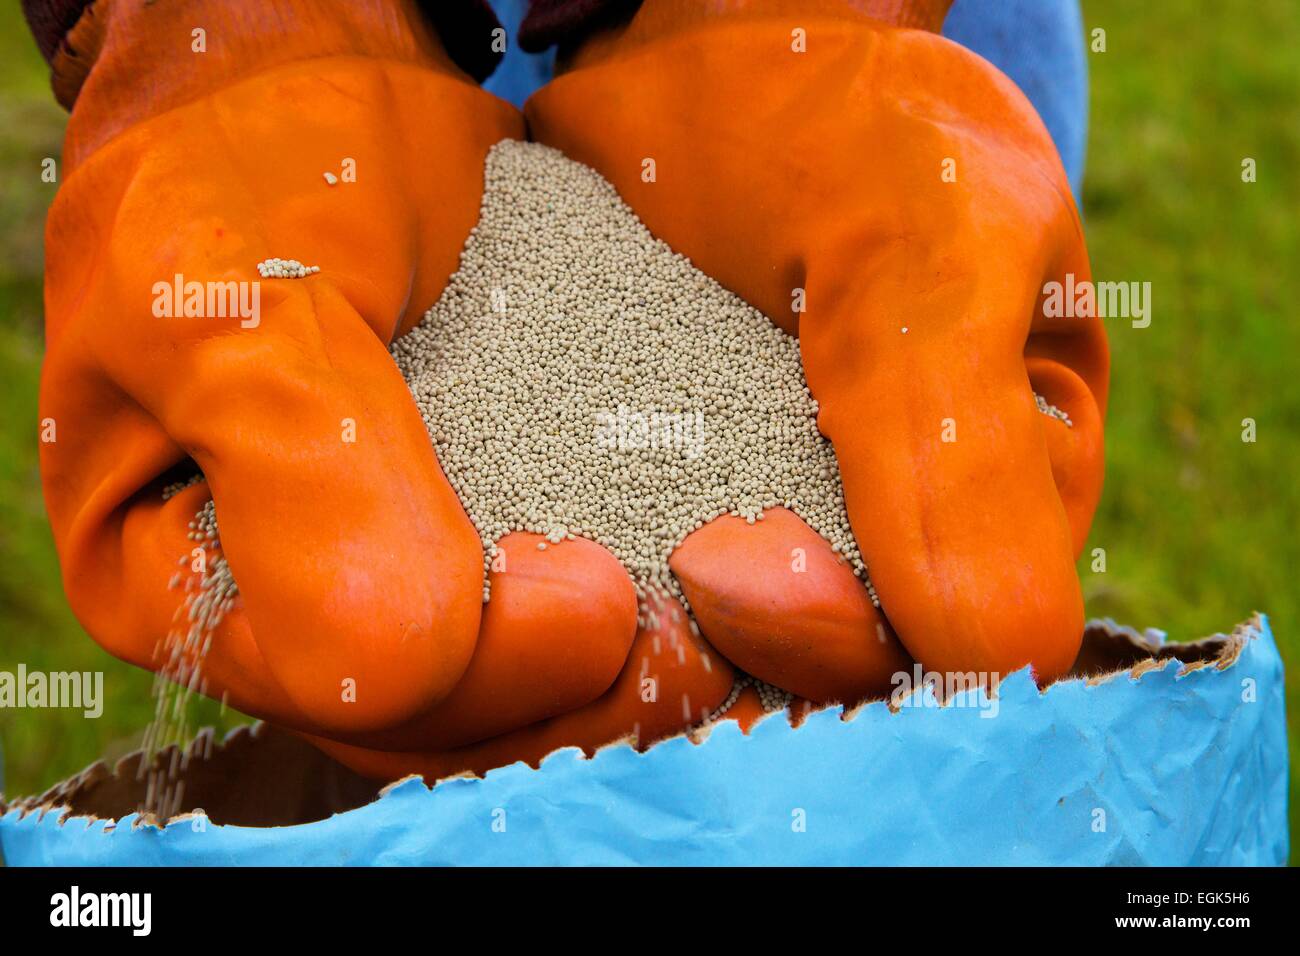 Farmer pouring clover seed through gloved hands into bag. Stock Photo